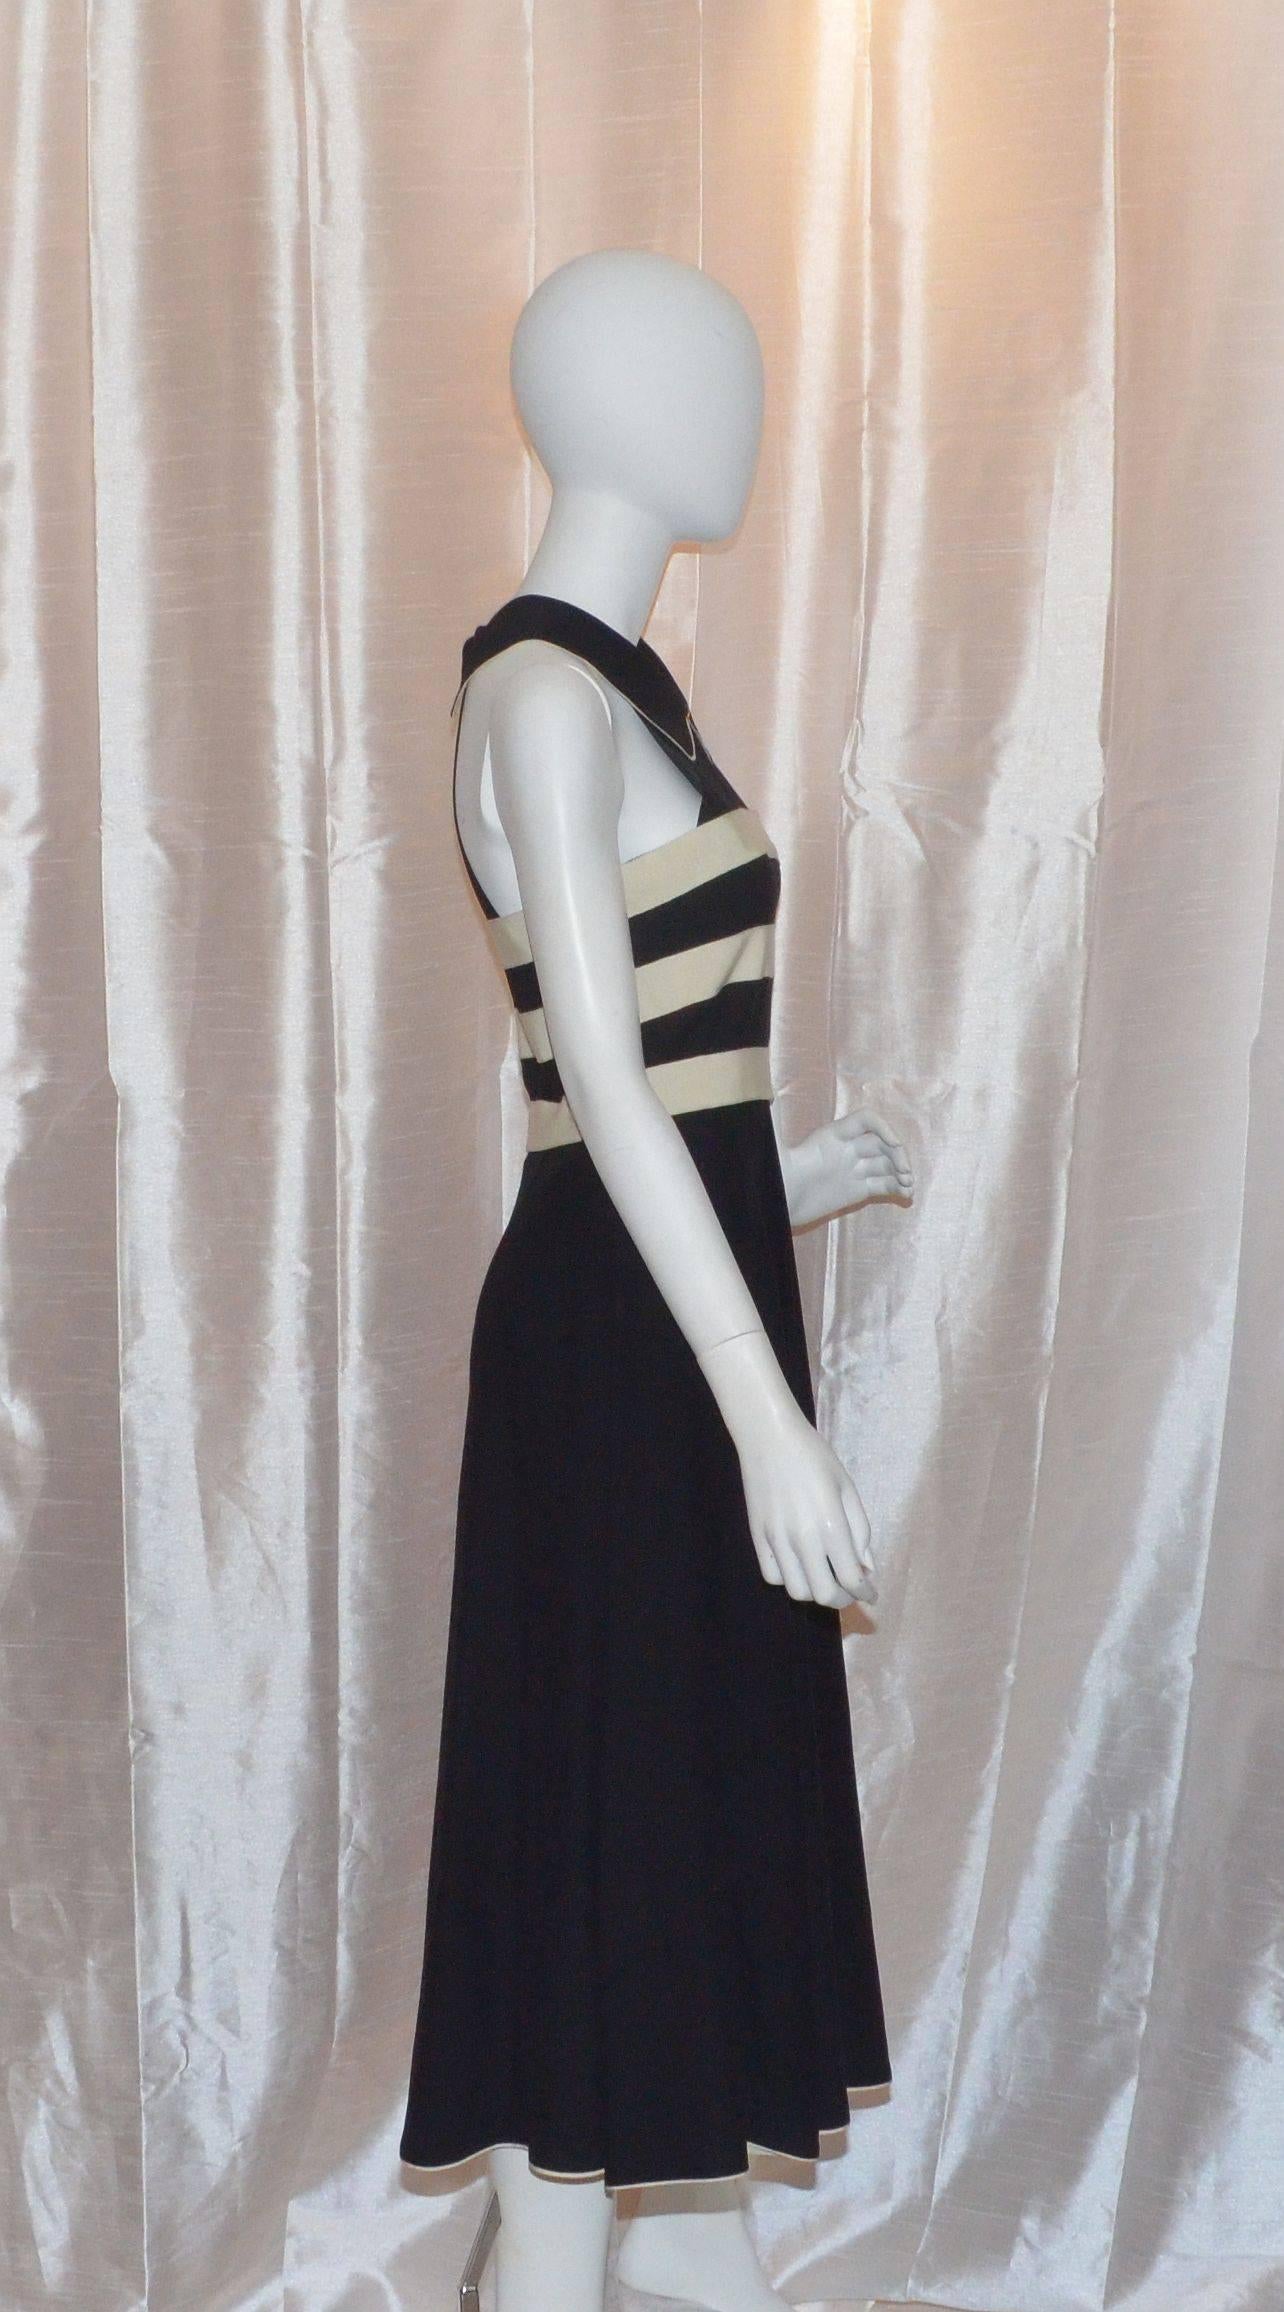 Black crepe Chanel dress features a key-hole detail neckline with decorative 'CC' button closure, back zipper closure with buttons at the collars. Ivory faille ribbon trim at the bandeau bodice, pointed collar and hem. Black and ivory striped